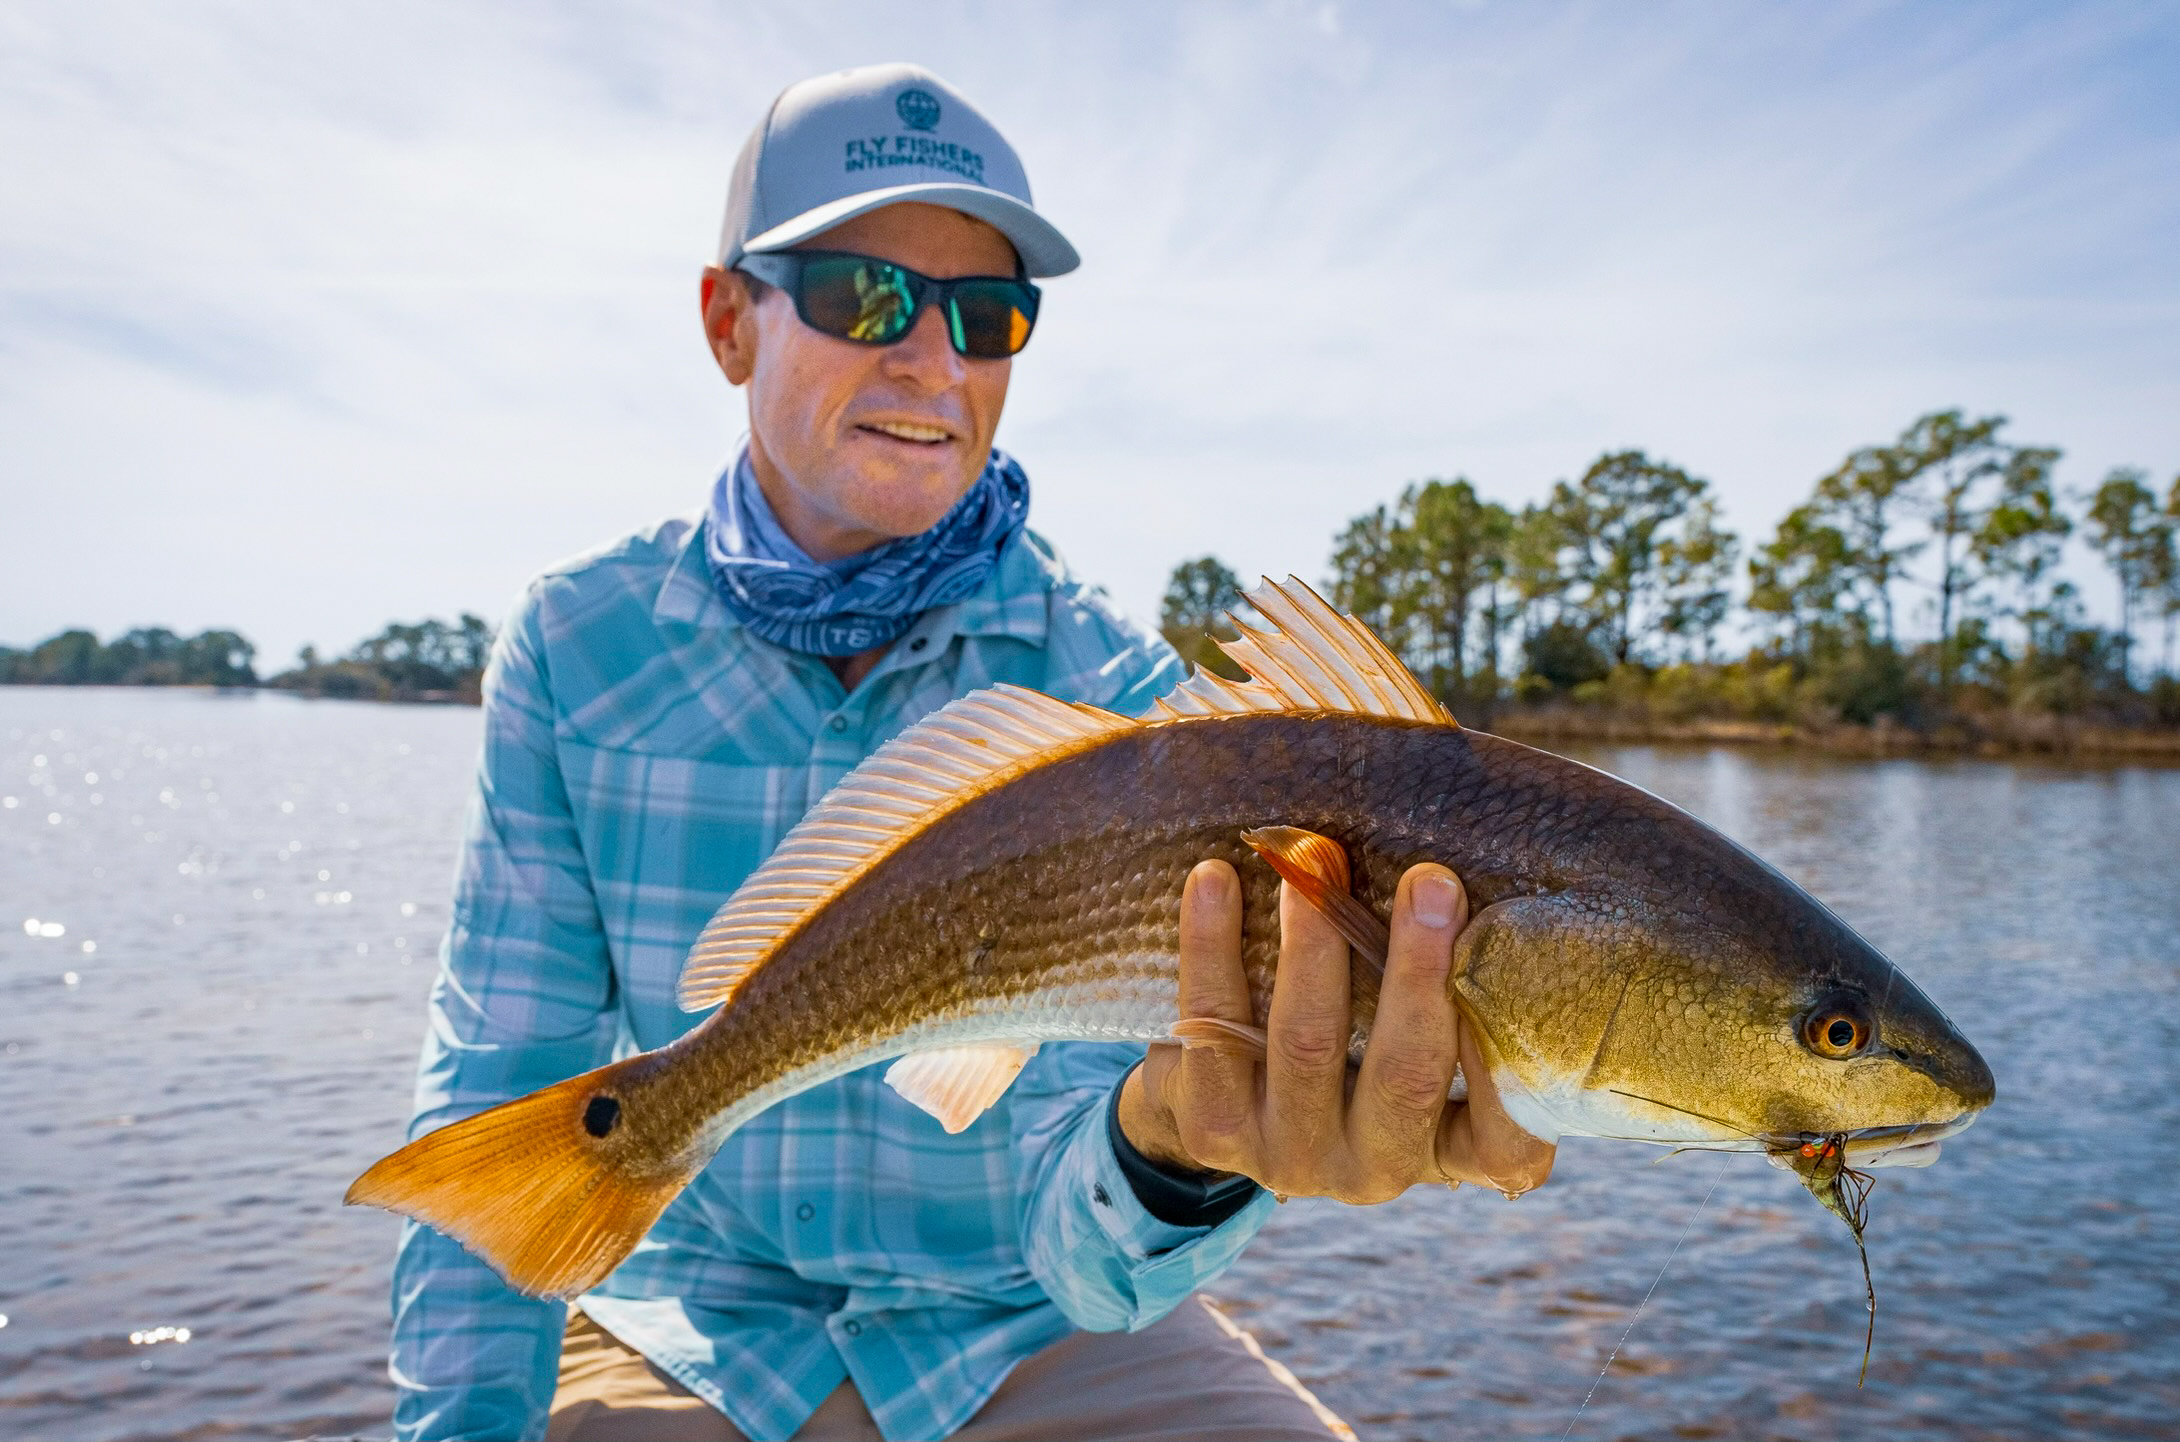 A fly angler in a blue shirt and blue hat holds up a small redfish caught on the fly.